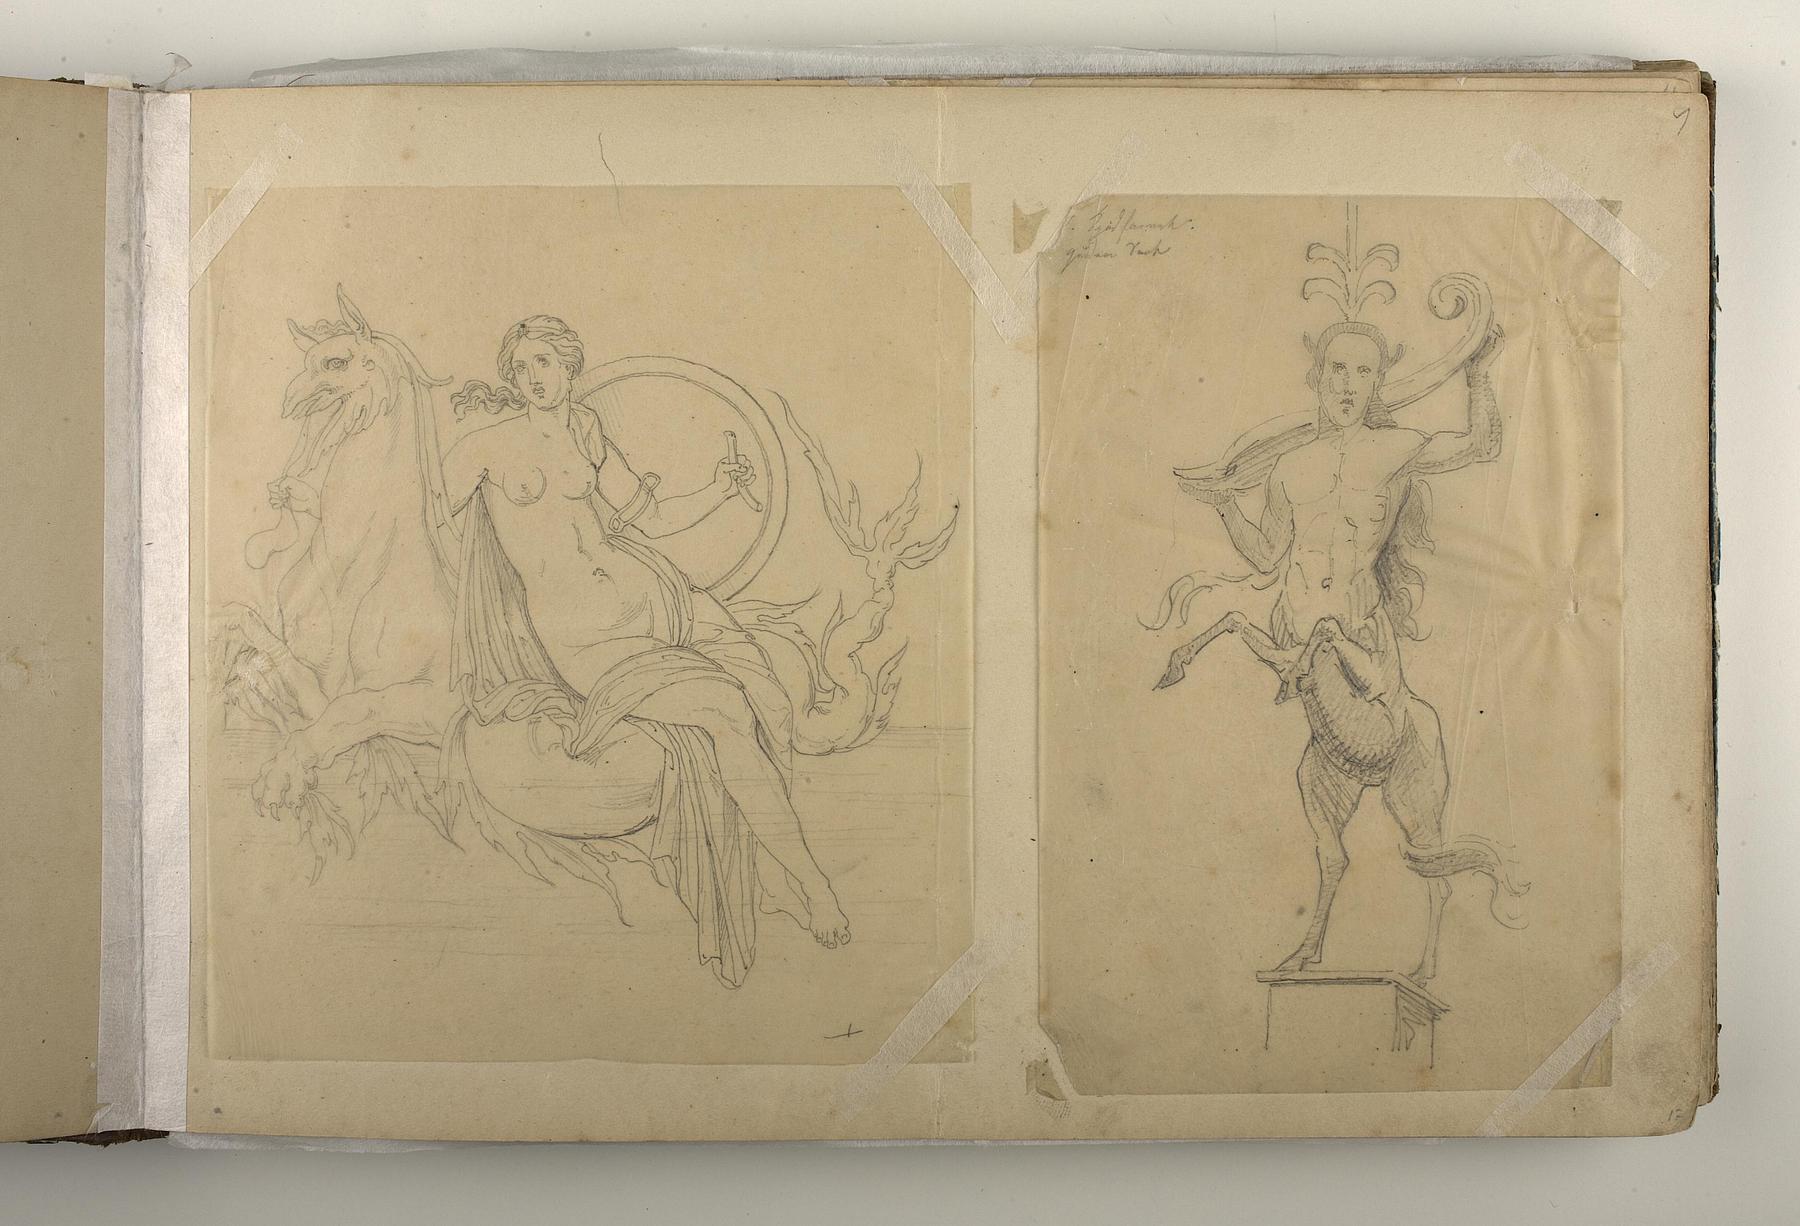 Female Figure with a Shield Seated on a Sea Monster. Centaur, D1827,17